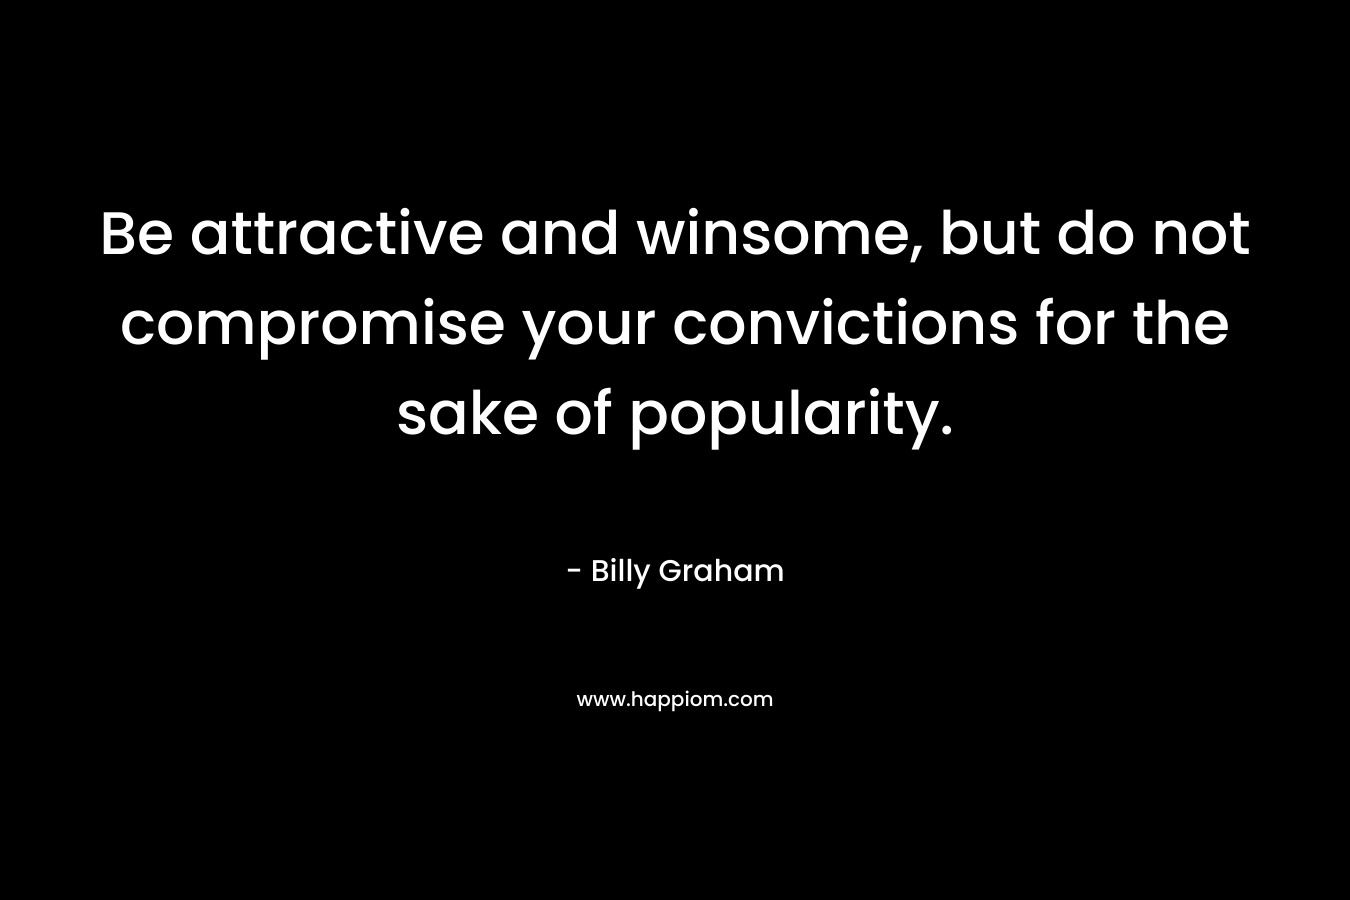 Be attractive and winsome, but do not compromise your convictions for the sake of popularity. – Billy Graham